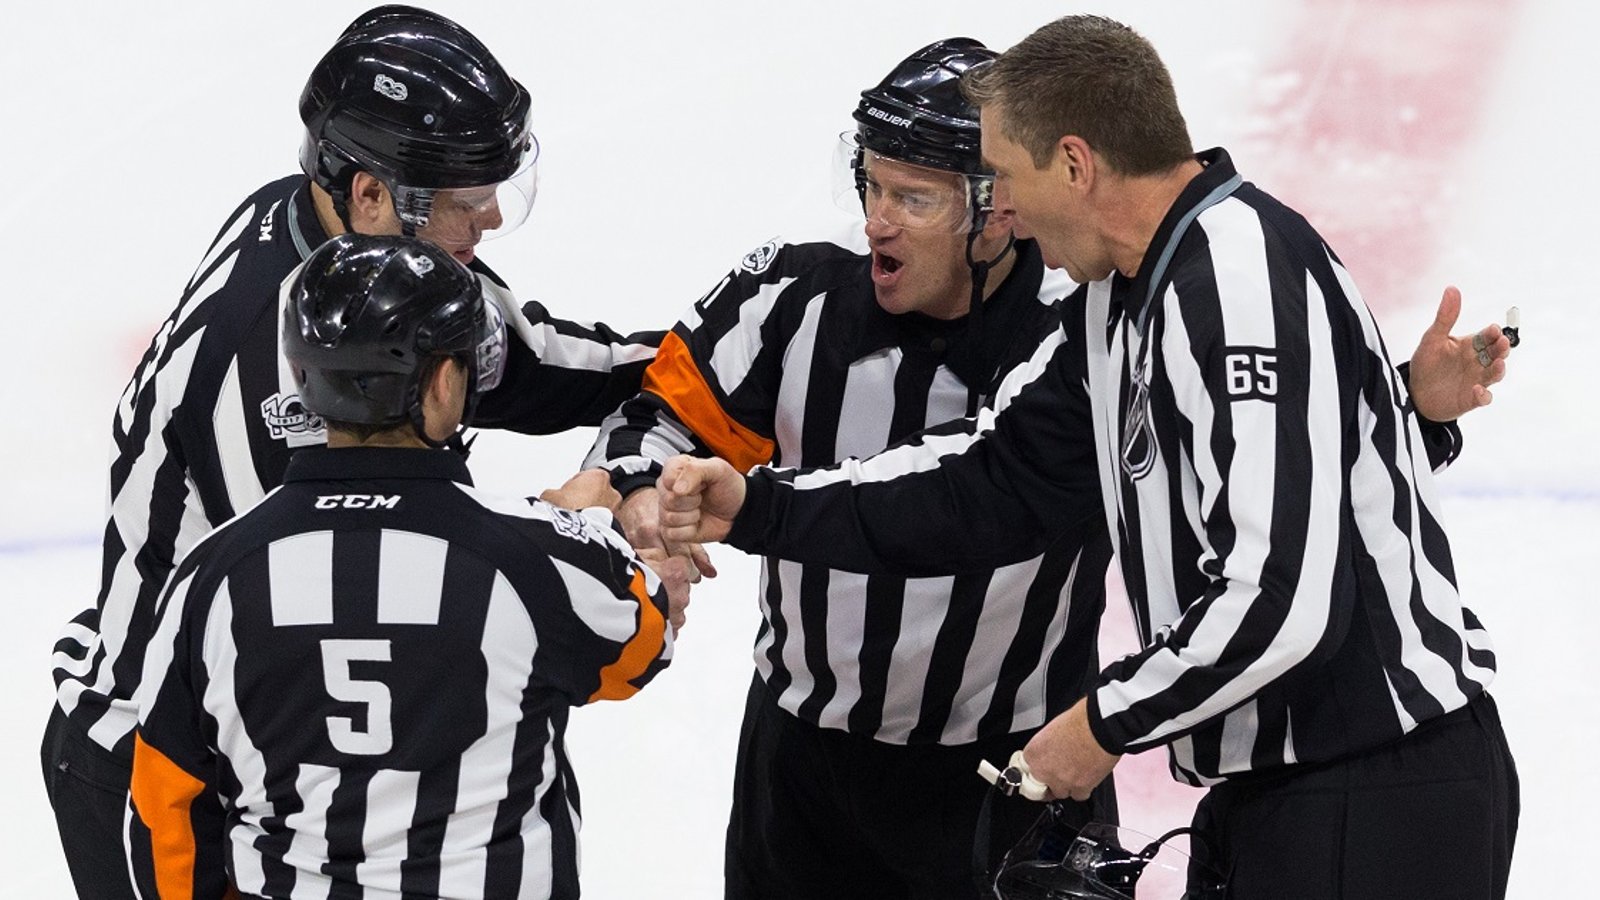 Breaking: Head coach loses it after horrible call from the NHL officials!